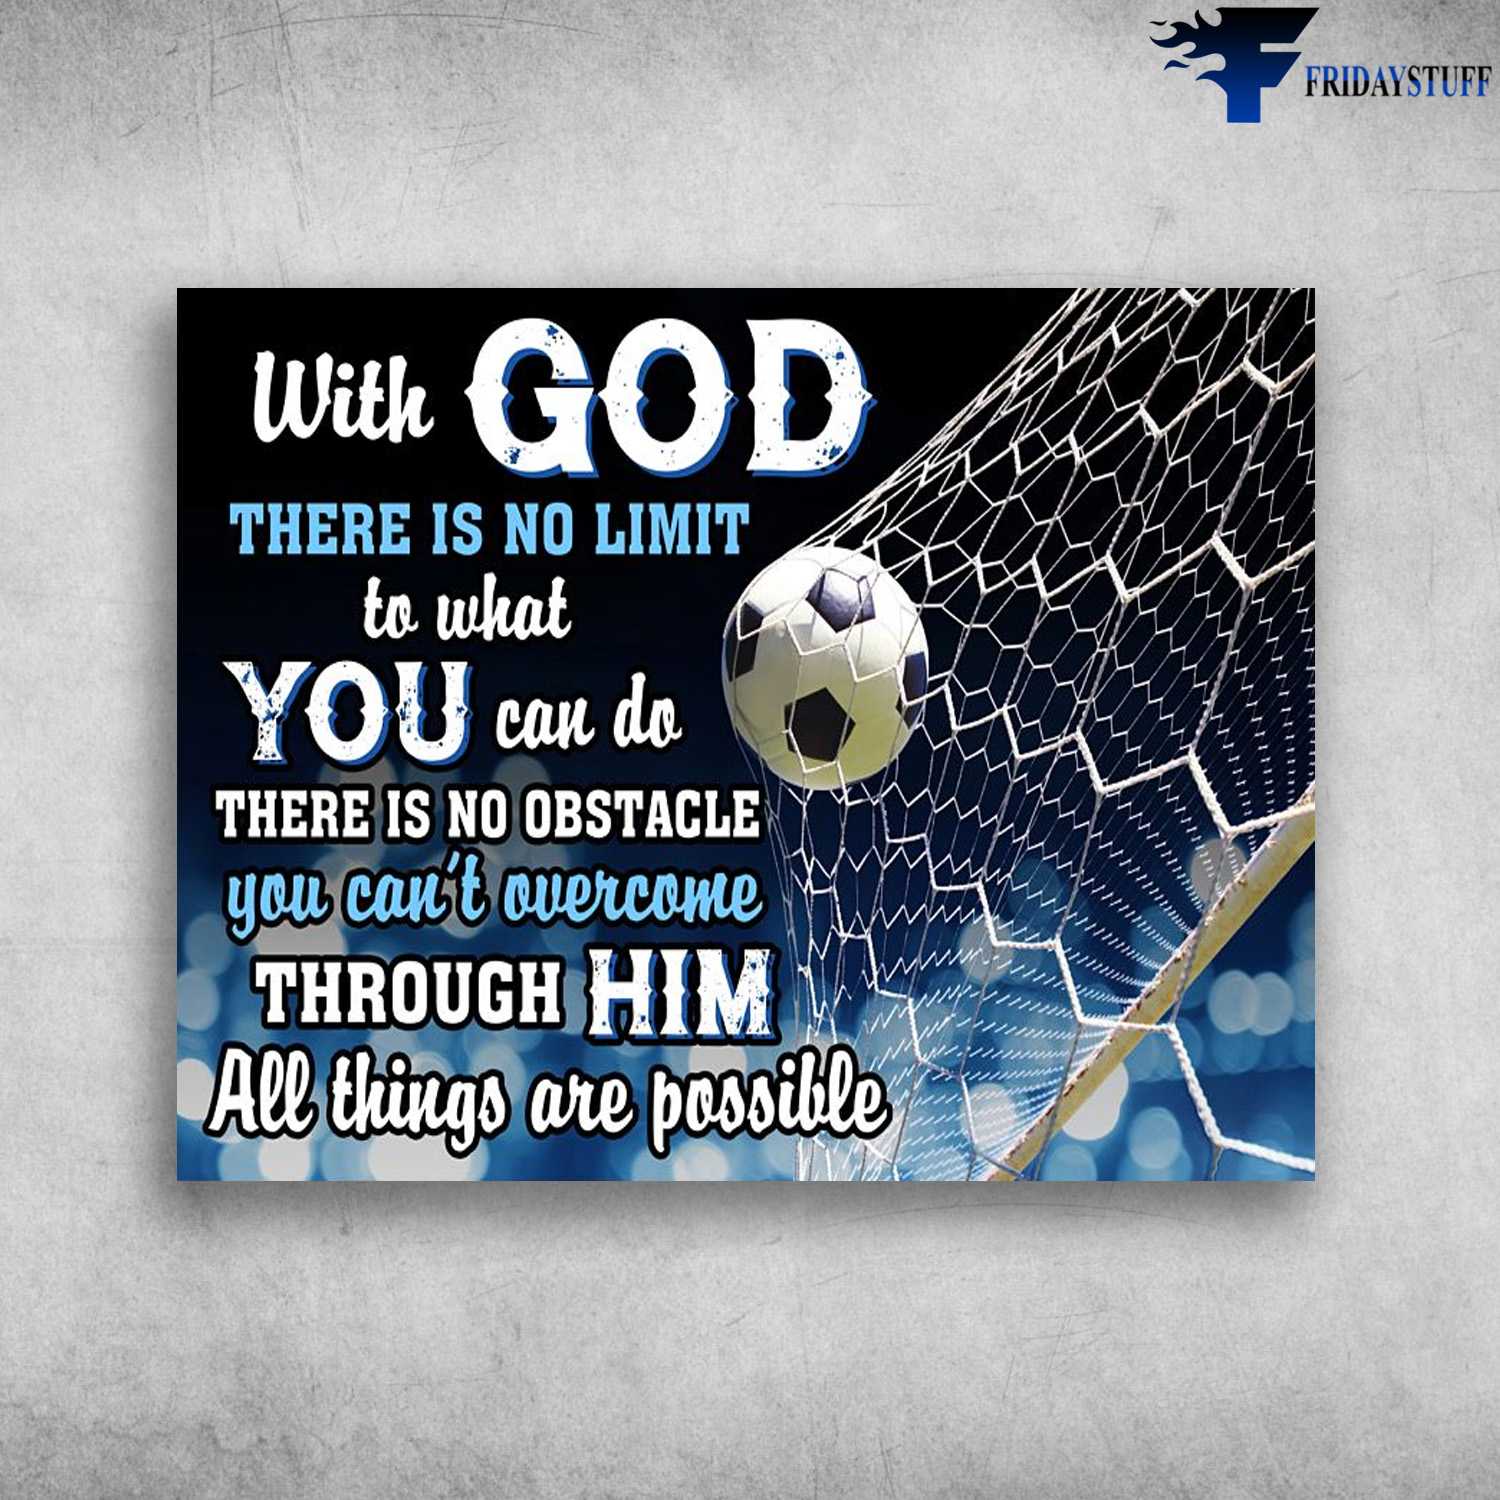 Soccer Player, Soccer Decor, With God, There Is No Limit To What You Can Do, There Is No Obstacle You Can't, Overcome Through Him, All Things Are Possible